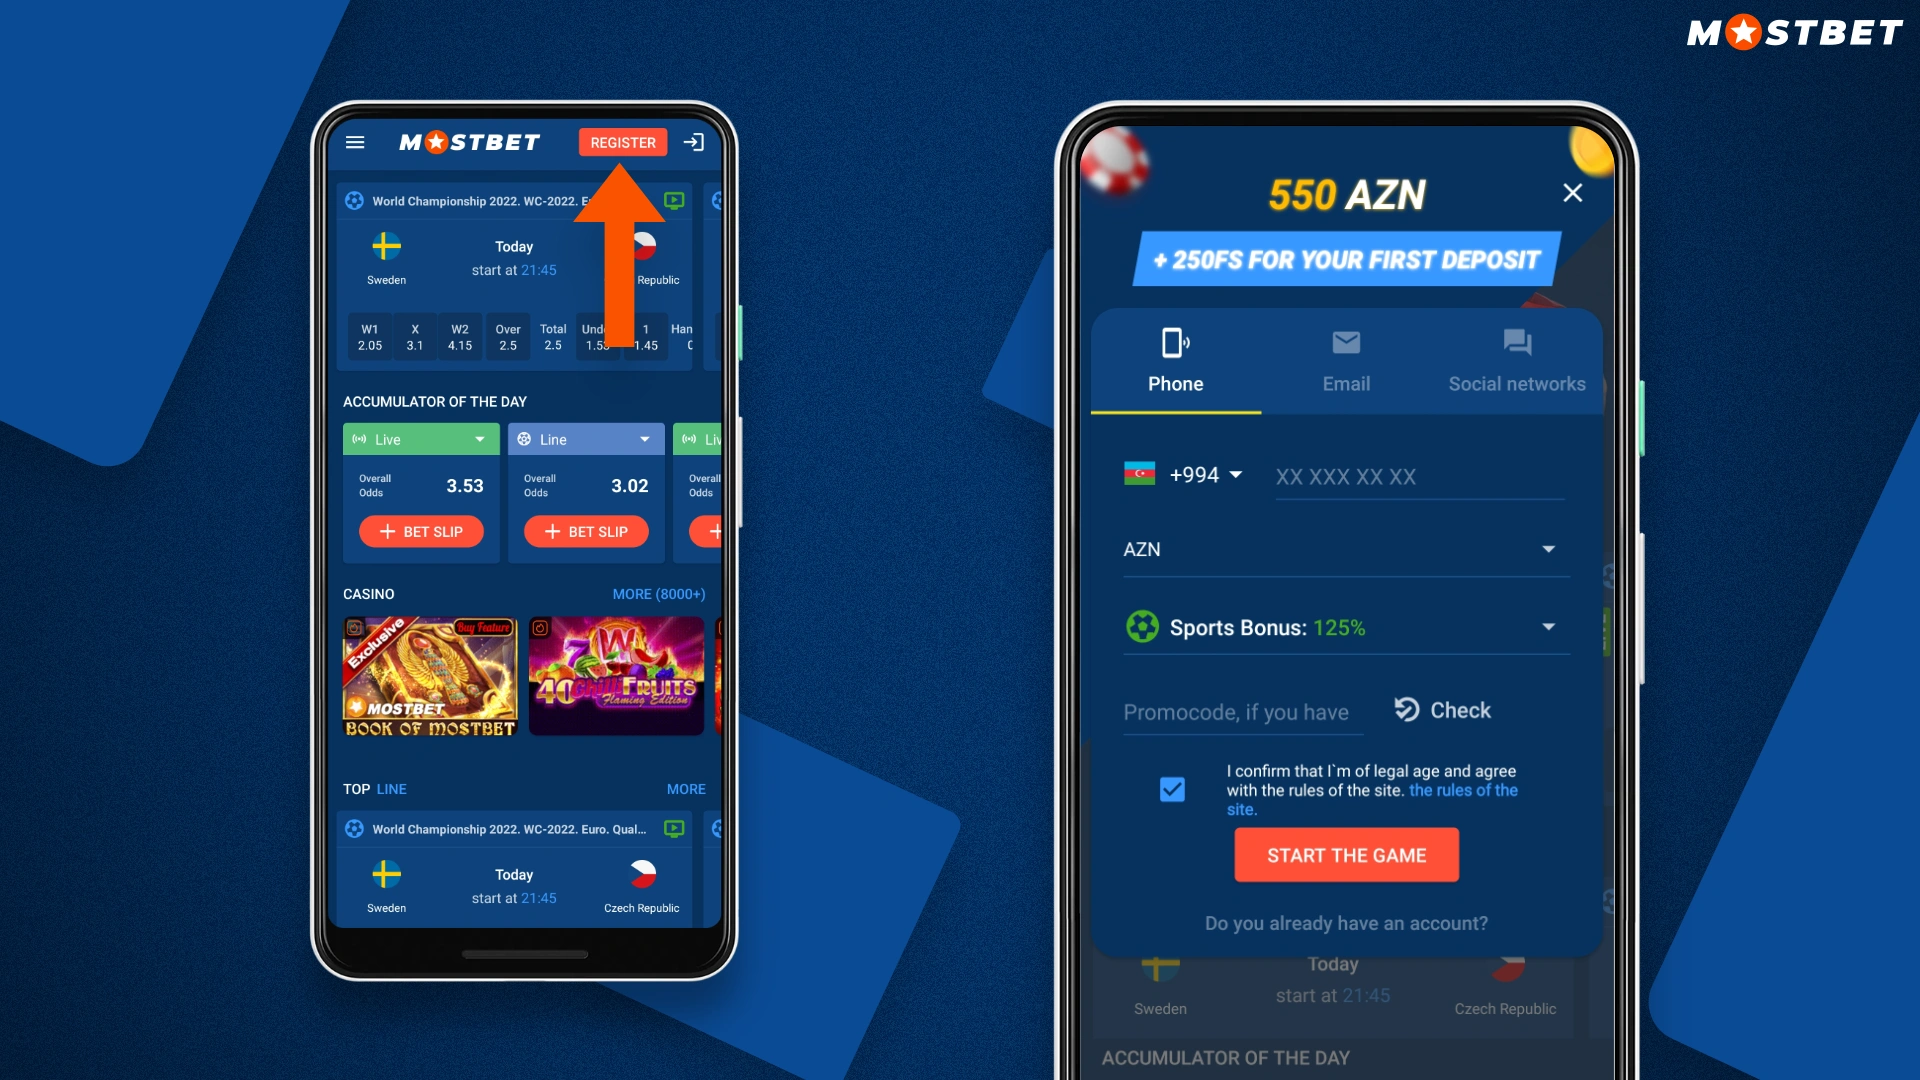 Detailed instructions on how to create a mostbet account in the mobile app